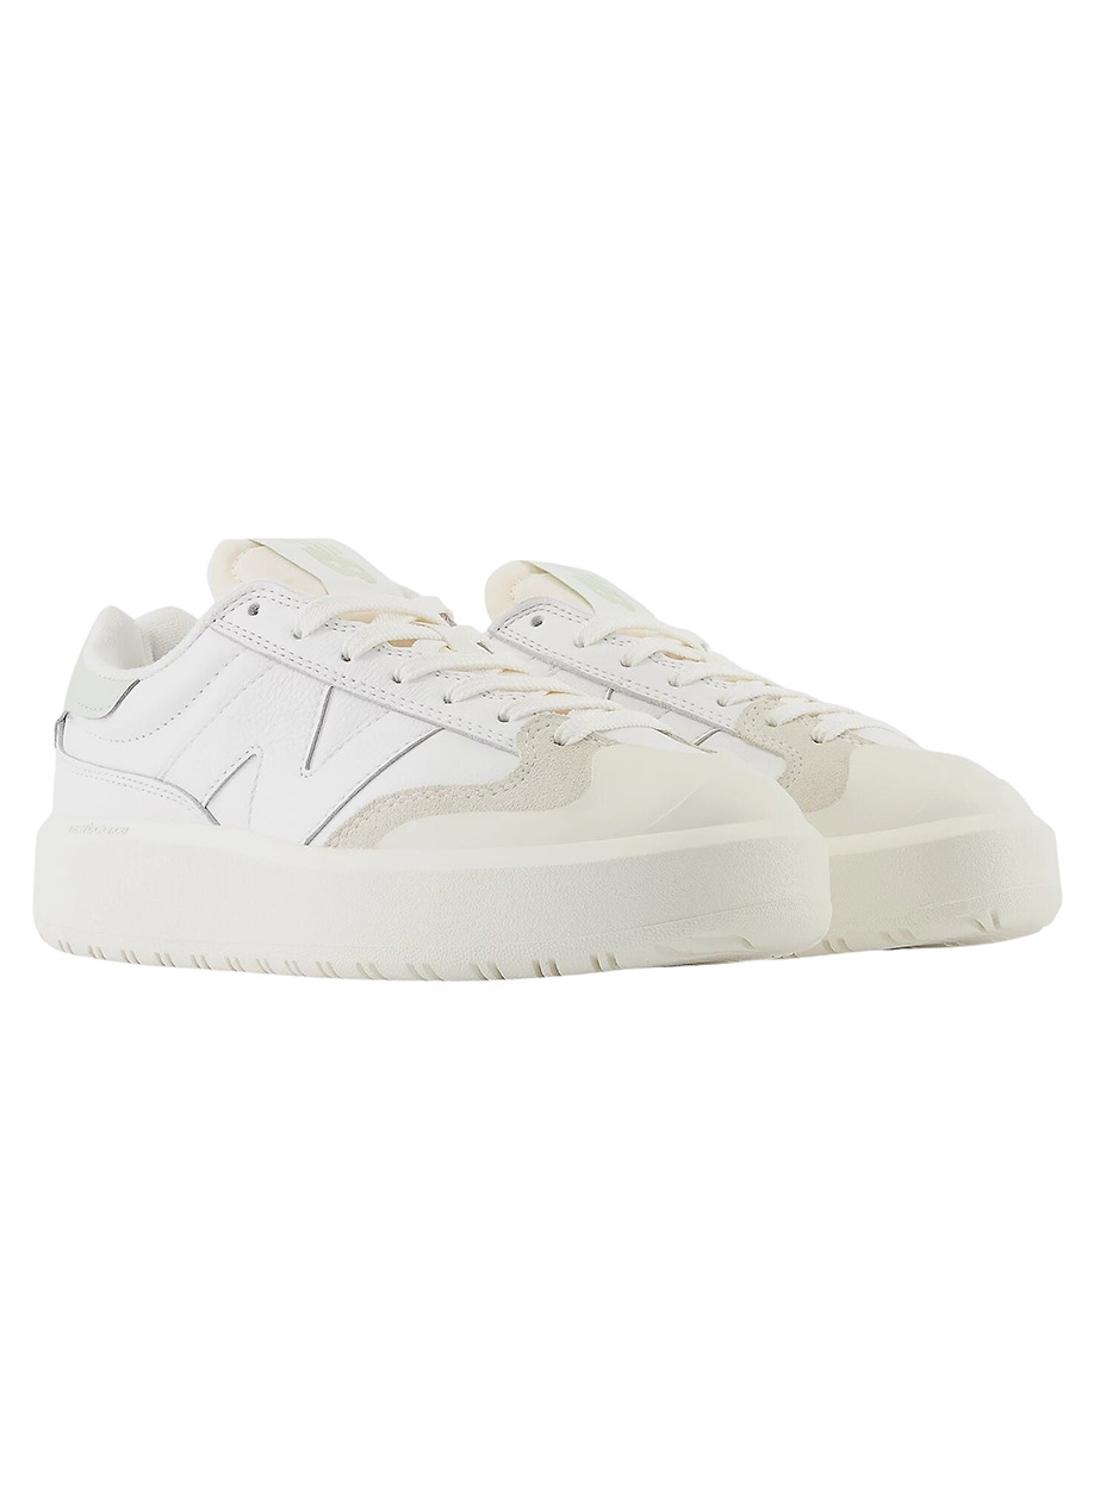 Sneakers New Balance CT302 Bianco Verde Donna